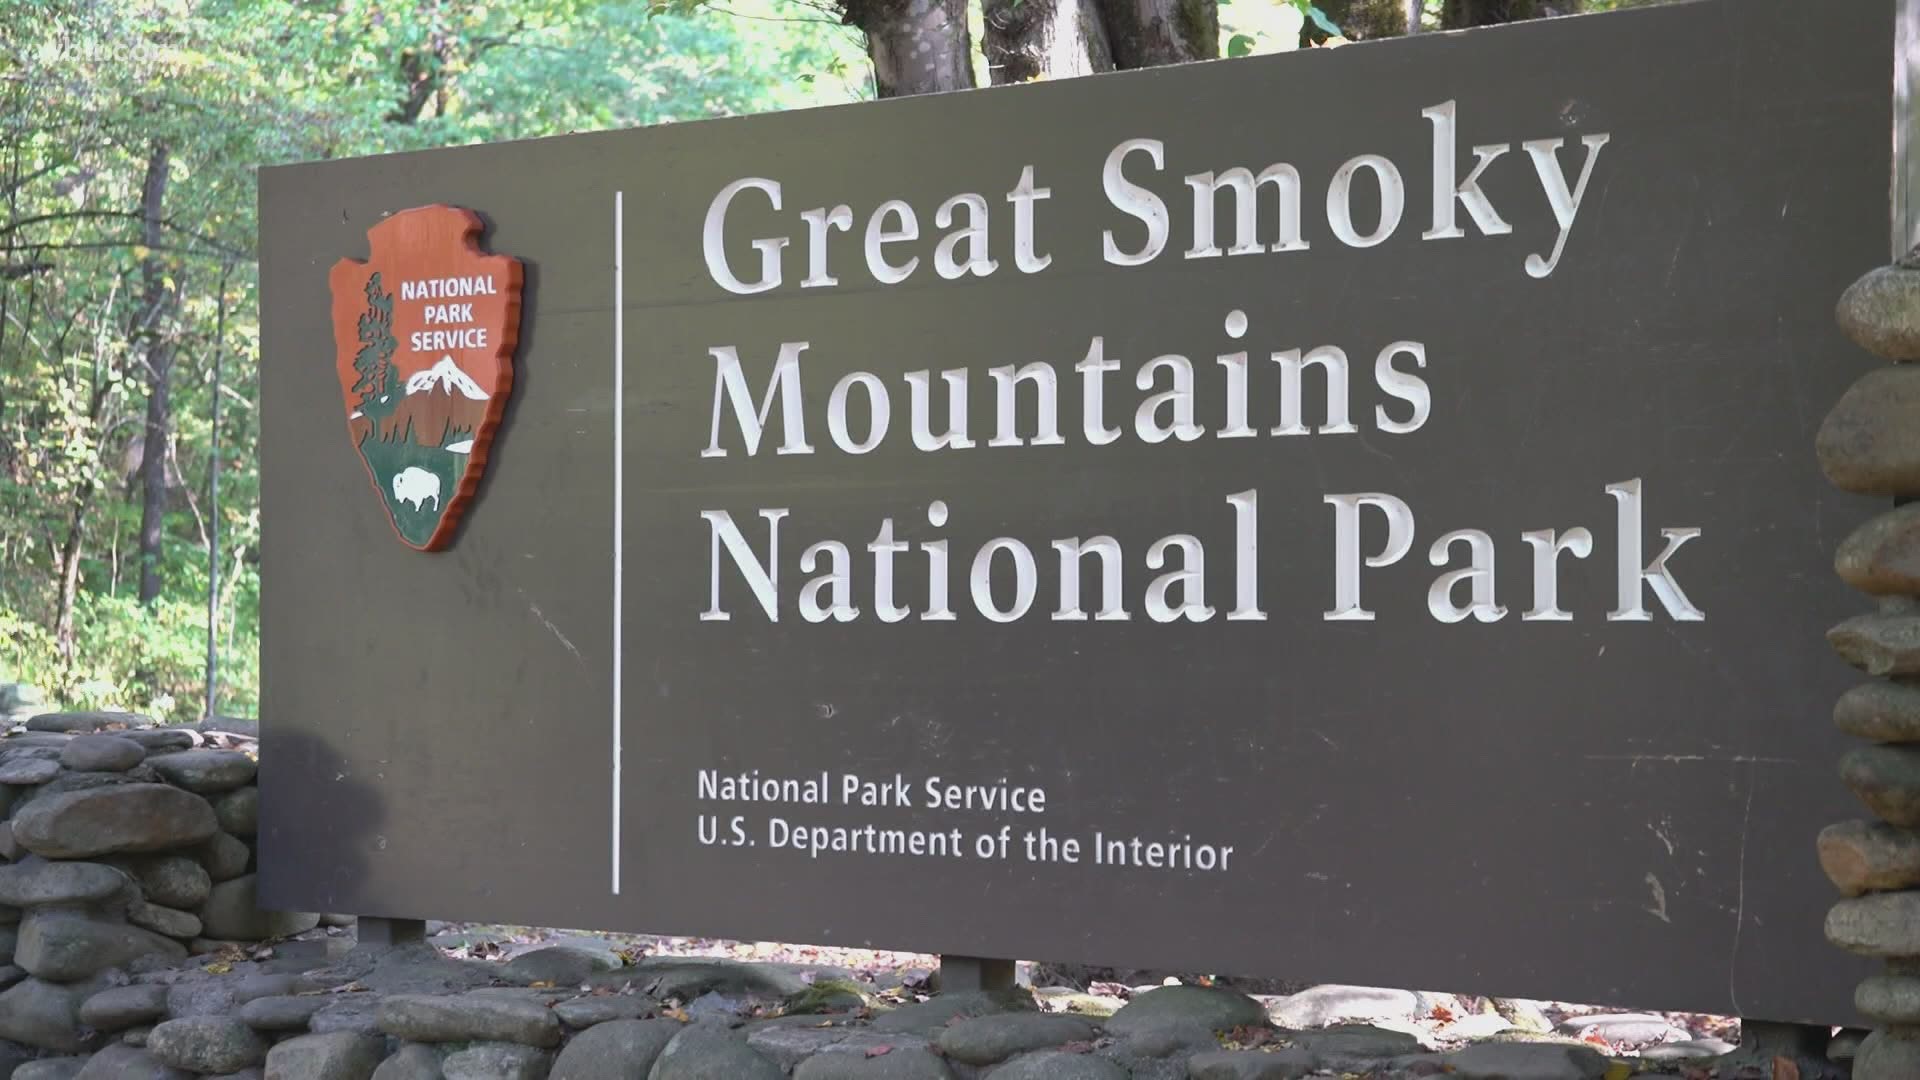 Tuesday marked the Great Smoky Mountains National Park's 87th birthday.